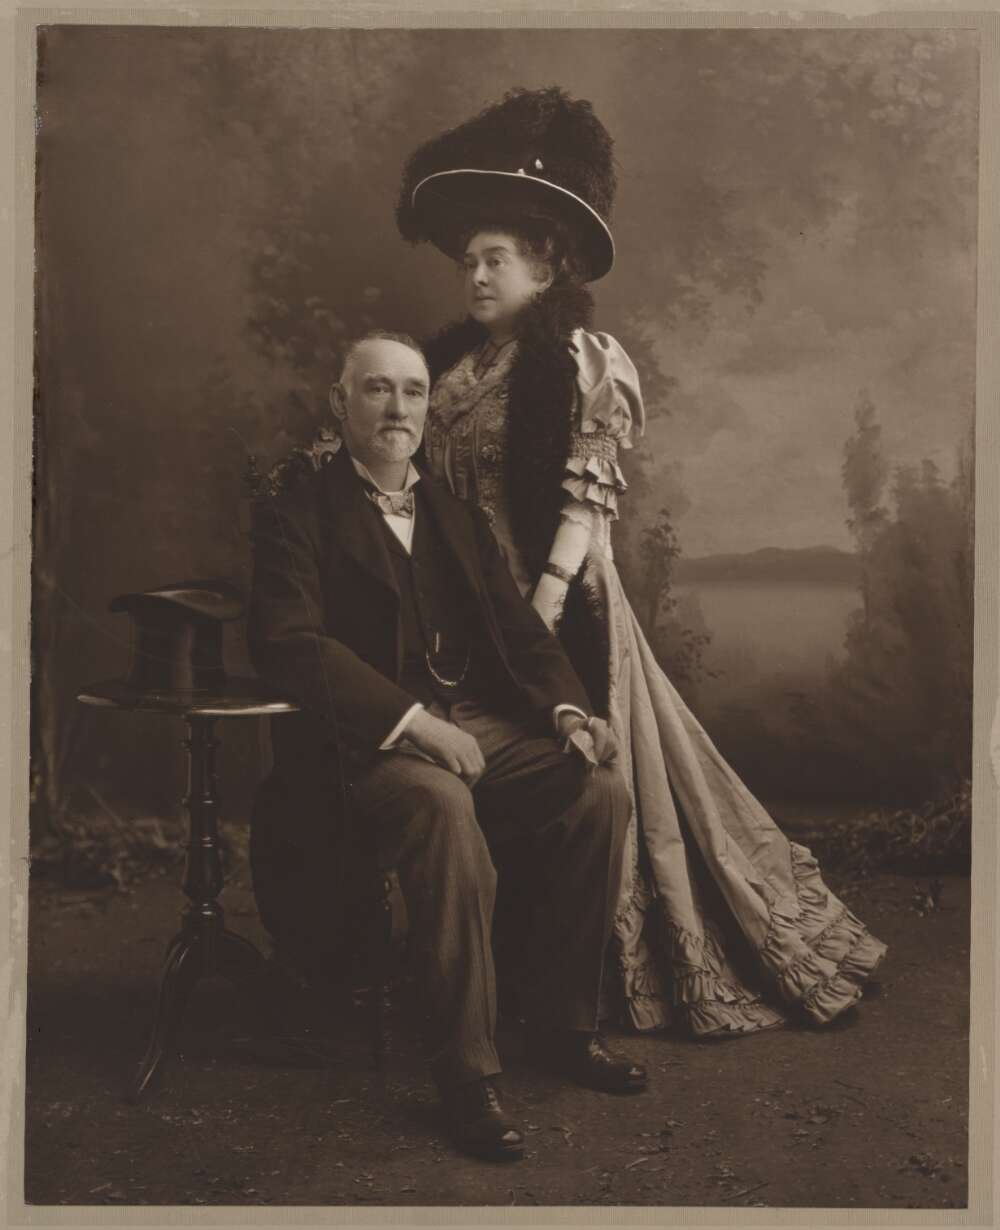 Woman in elaborate dress and large hat standing behind formally dressed man sitting on a chair